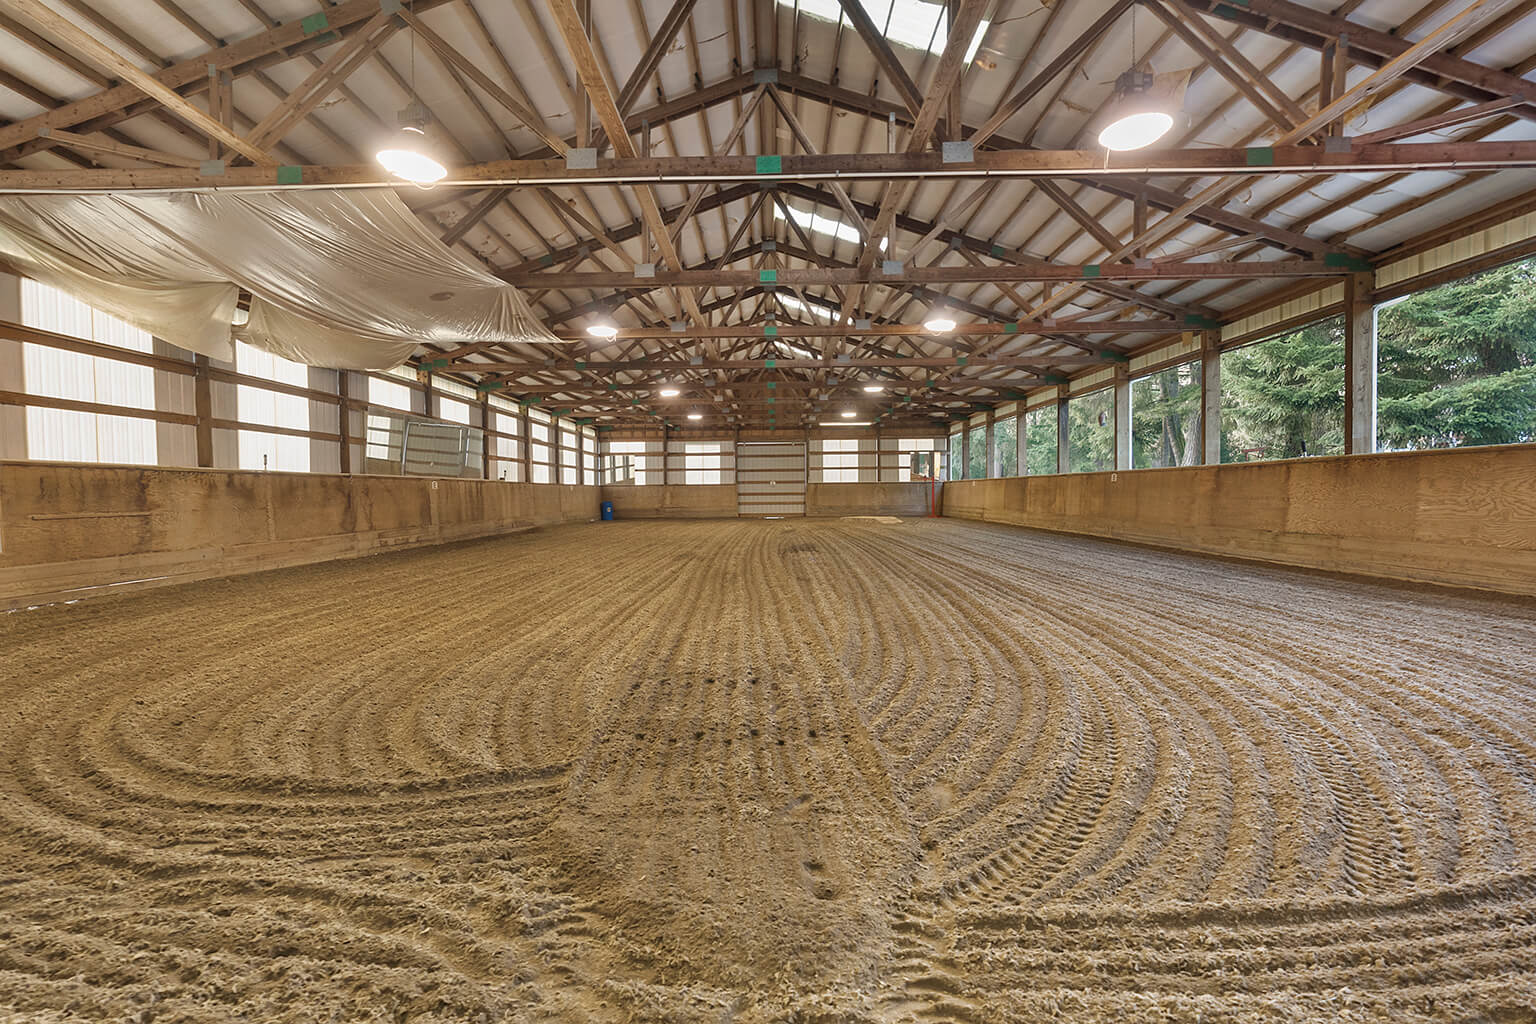 60’ x 120’ covered arena